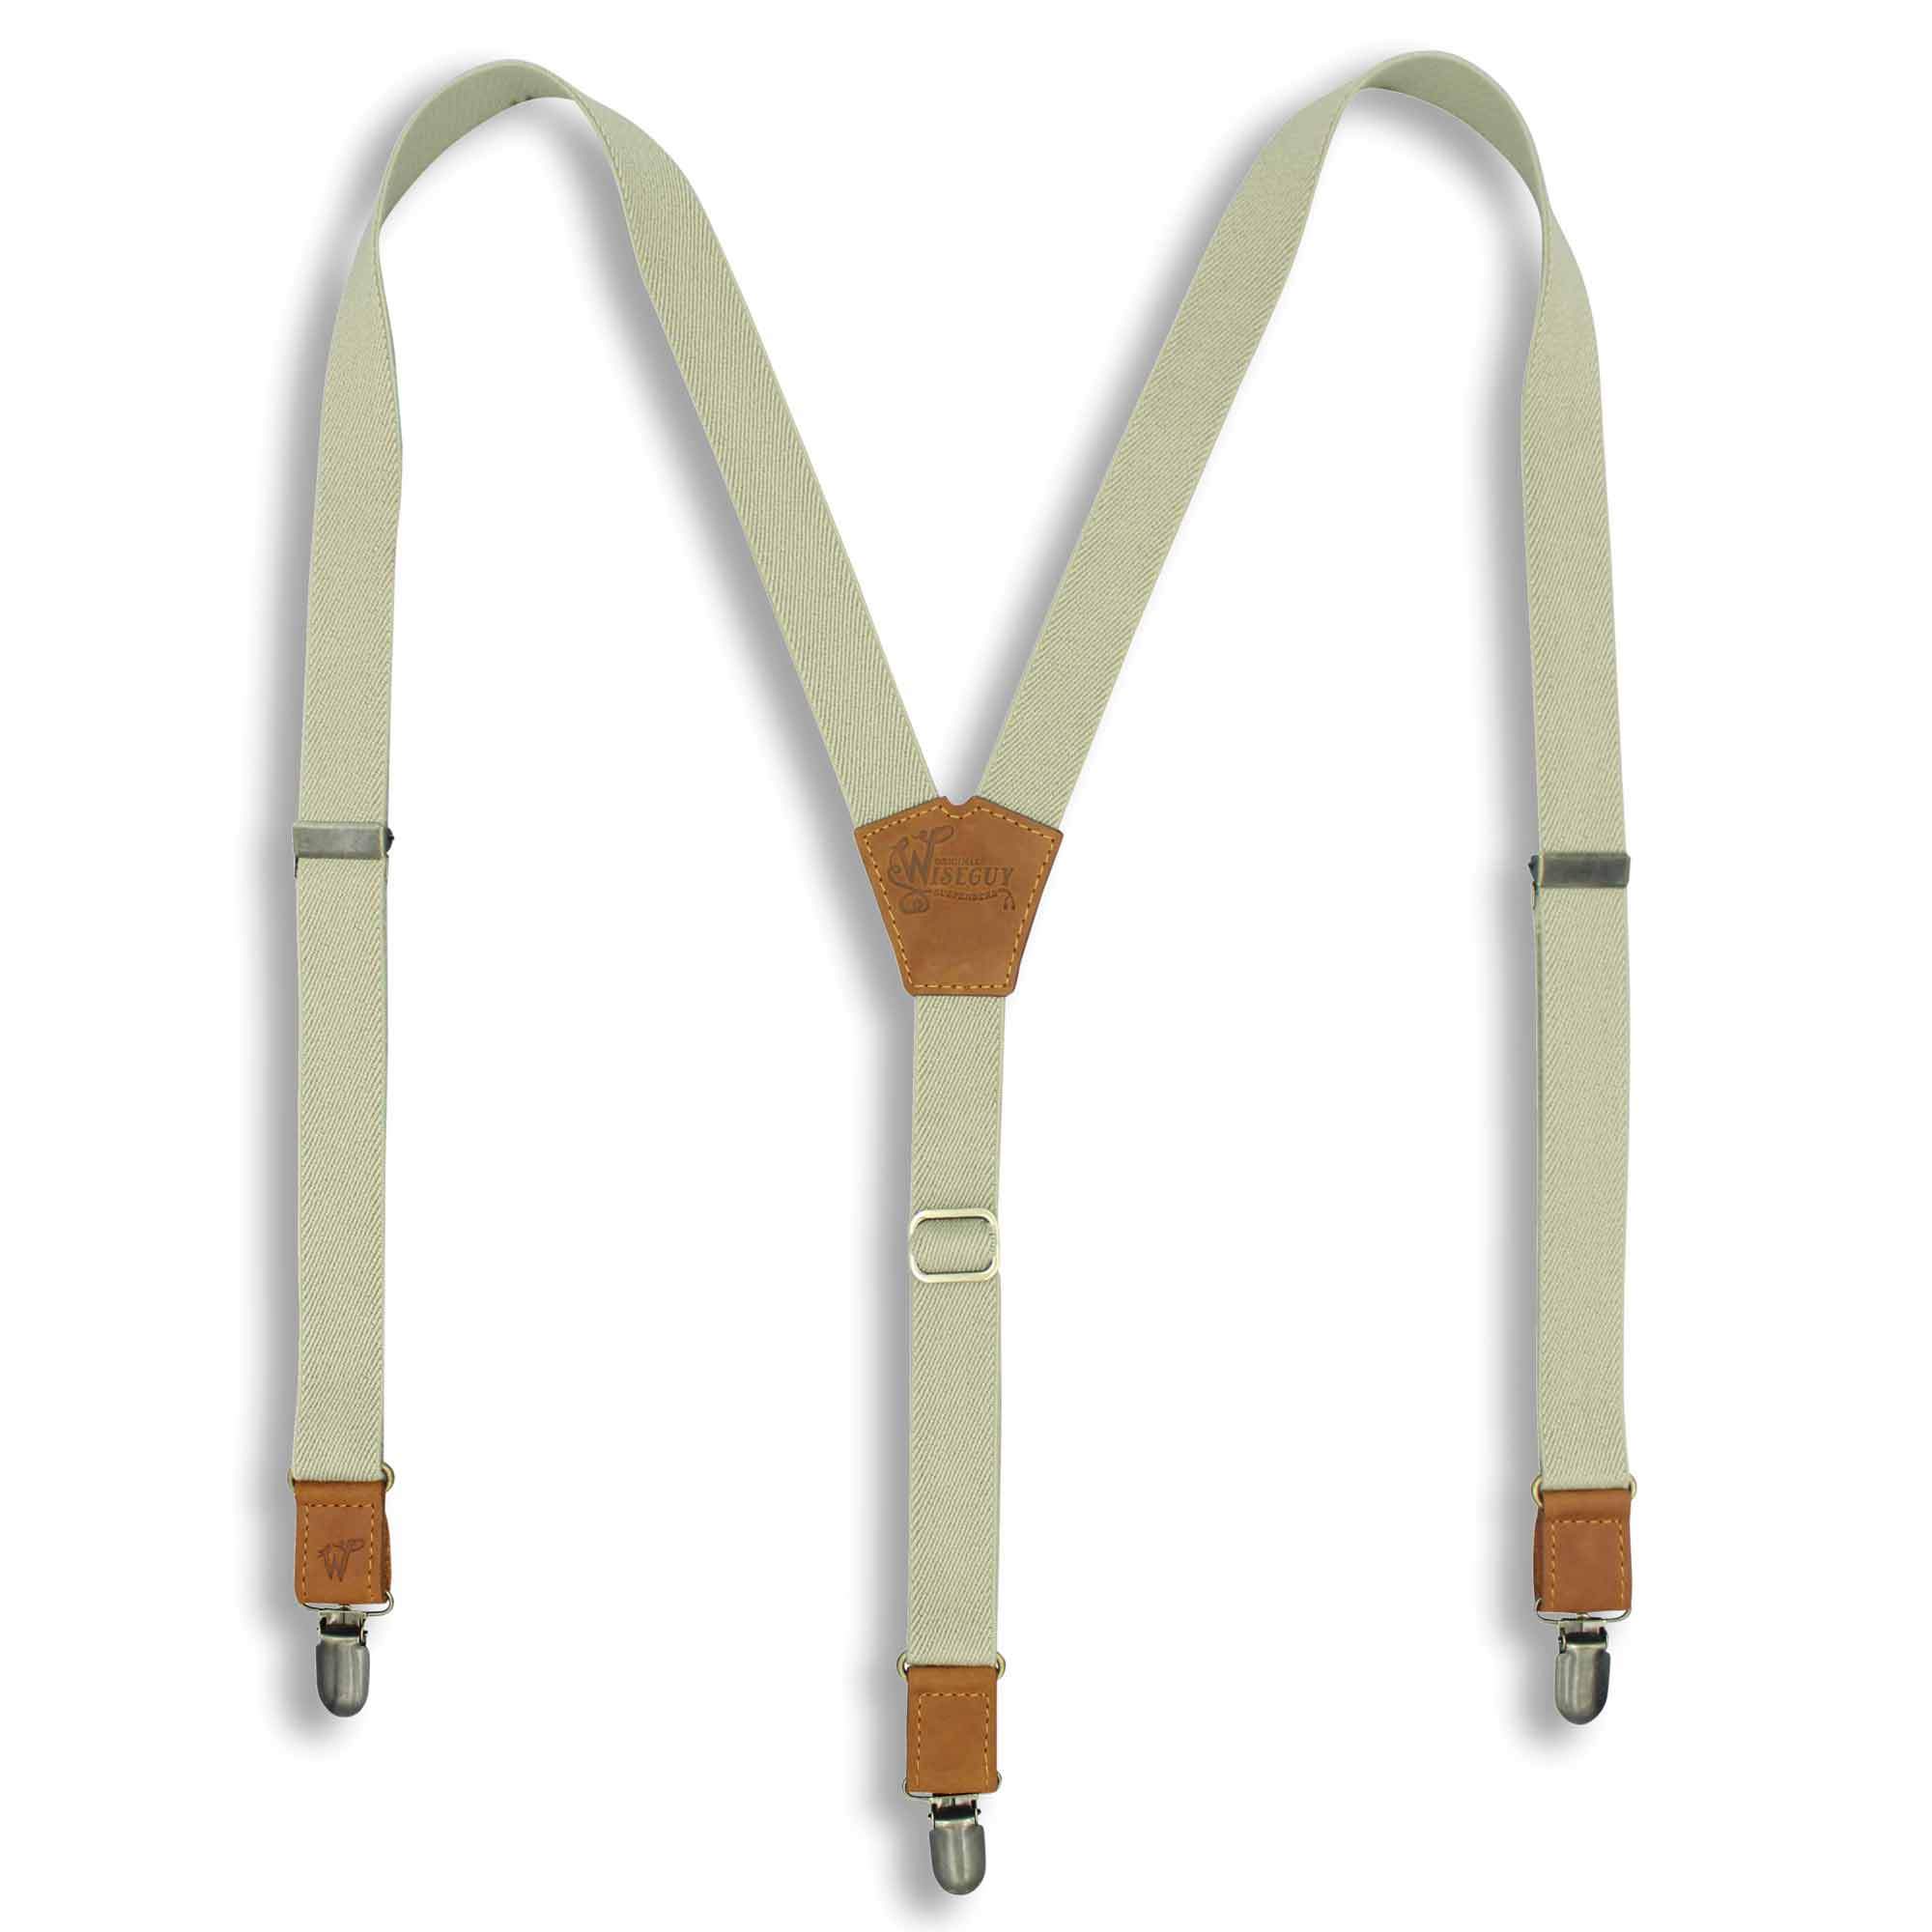 Desert Sand Formal Suspenders with Camel Brown Leather Parts 1 inch - Wiseguy Suspenders